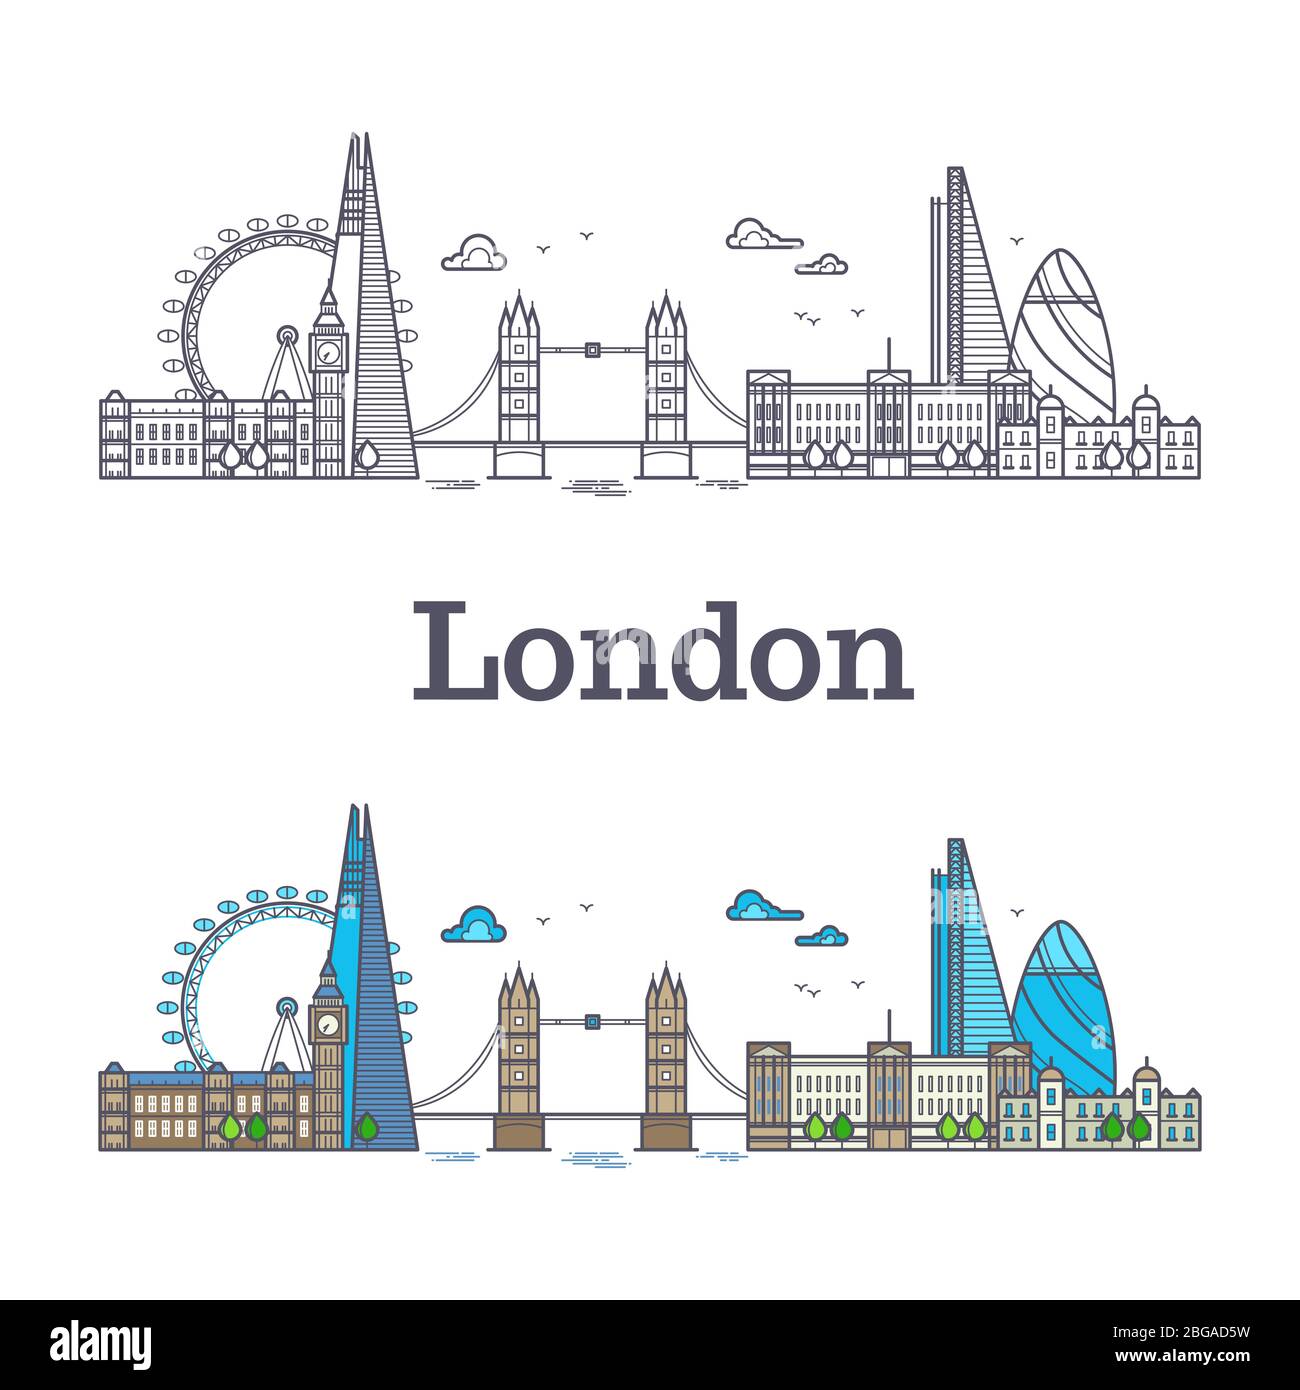 London city skyline with famous buildings, tourism england landmarks outline and bright vector illustration Stock Vector